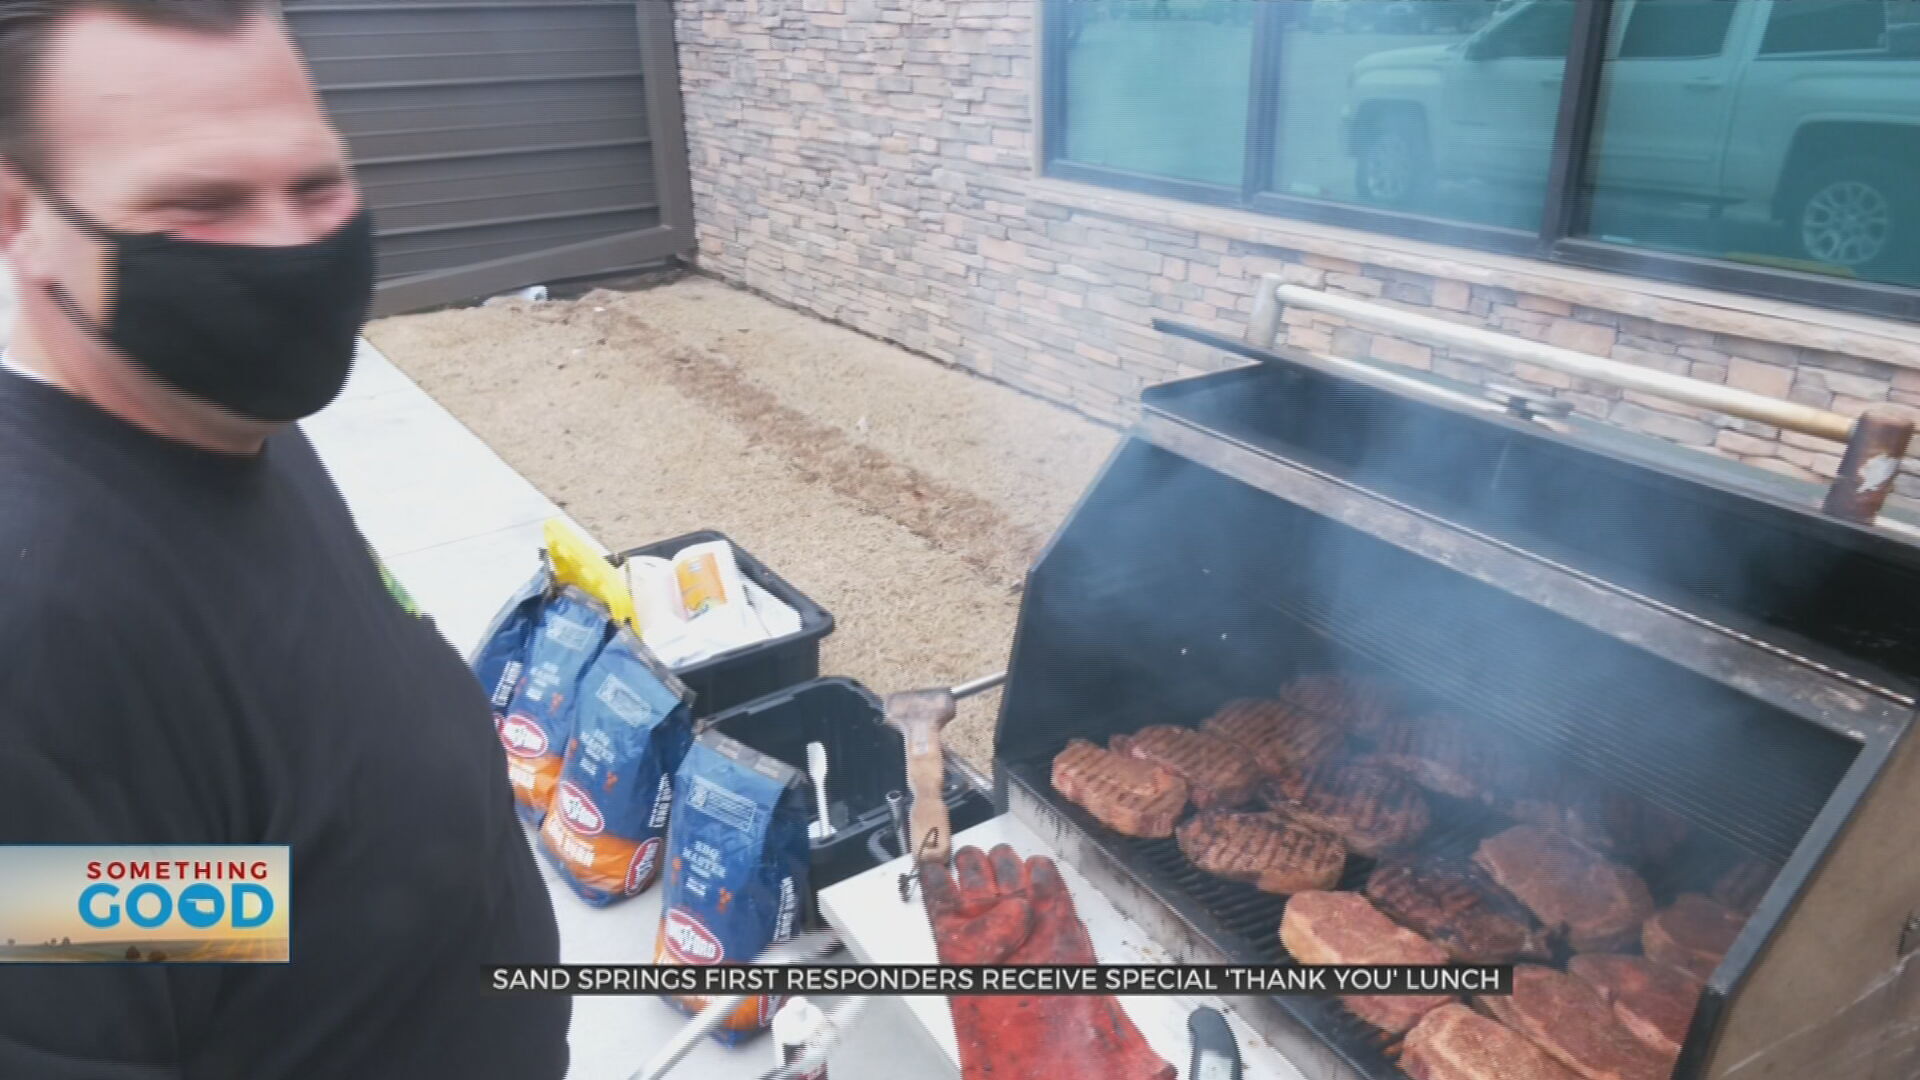 Nonprofit Serves Special ‘Thank You’ Lunch To Sand Springs First Responders 